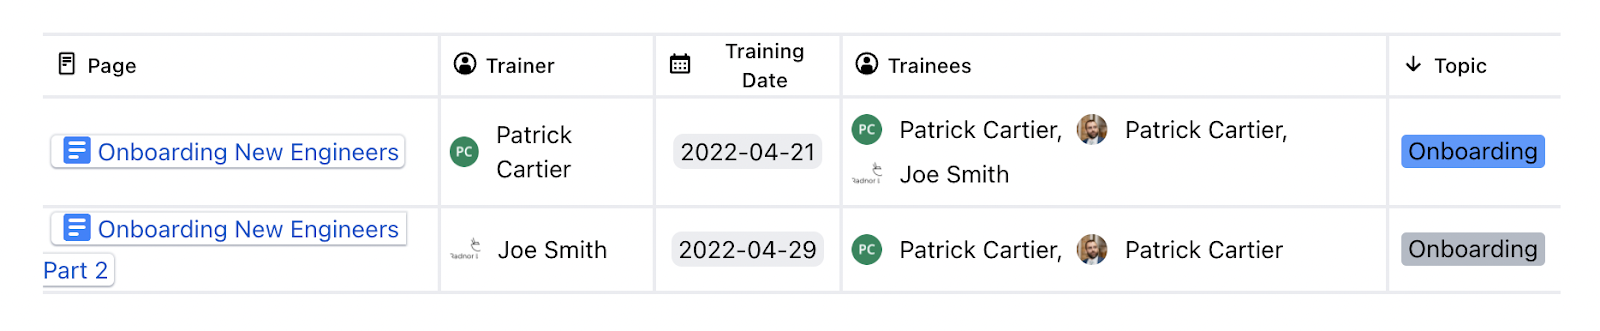 training portal confluence properties - only display onboarding training